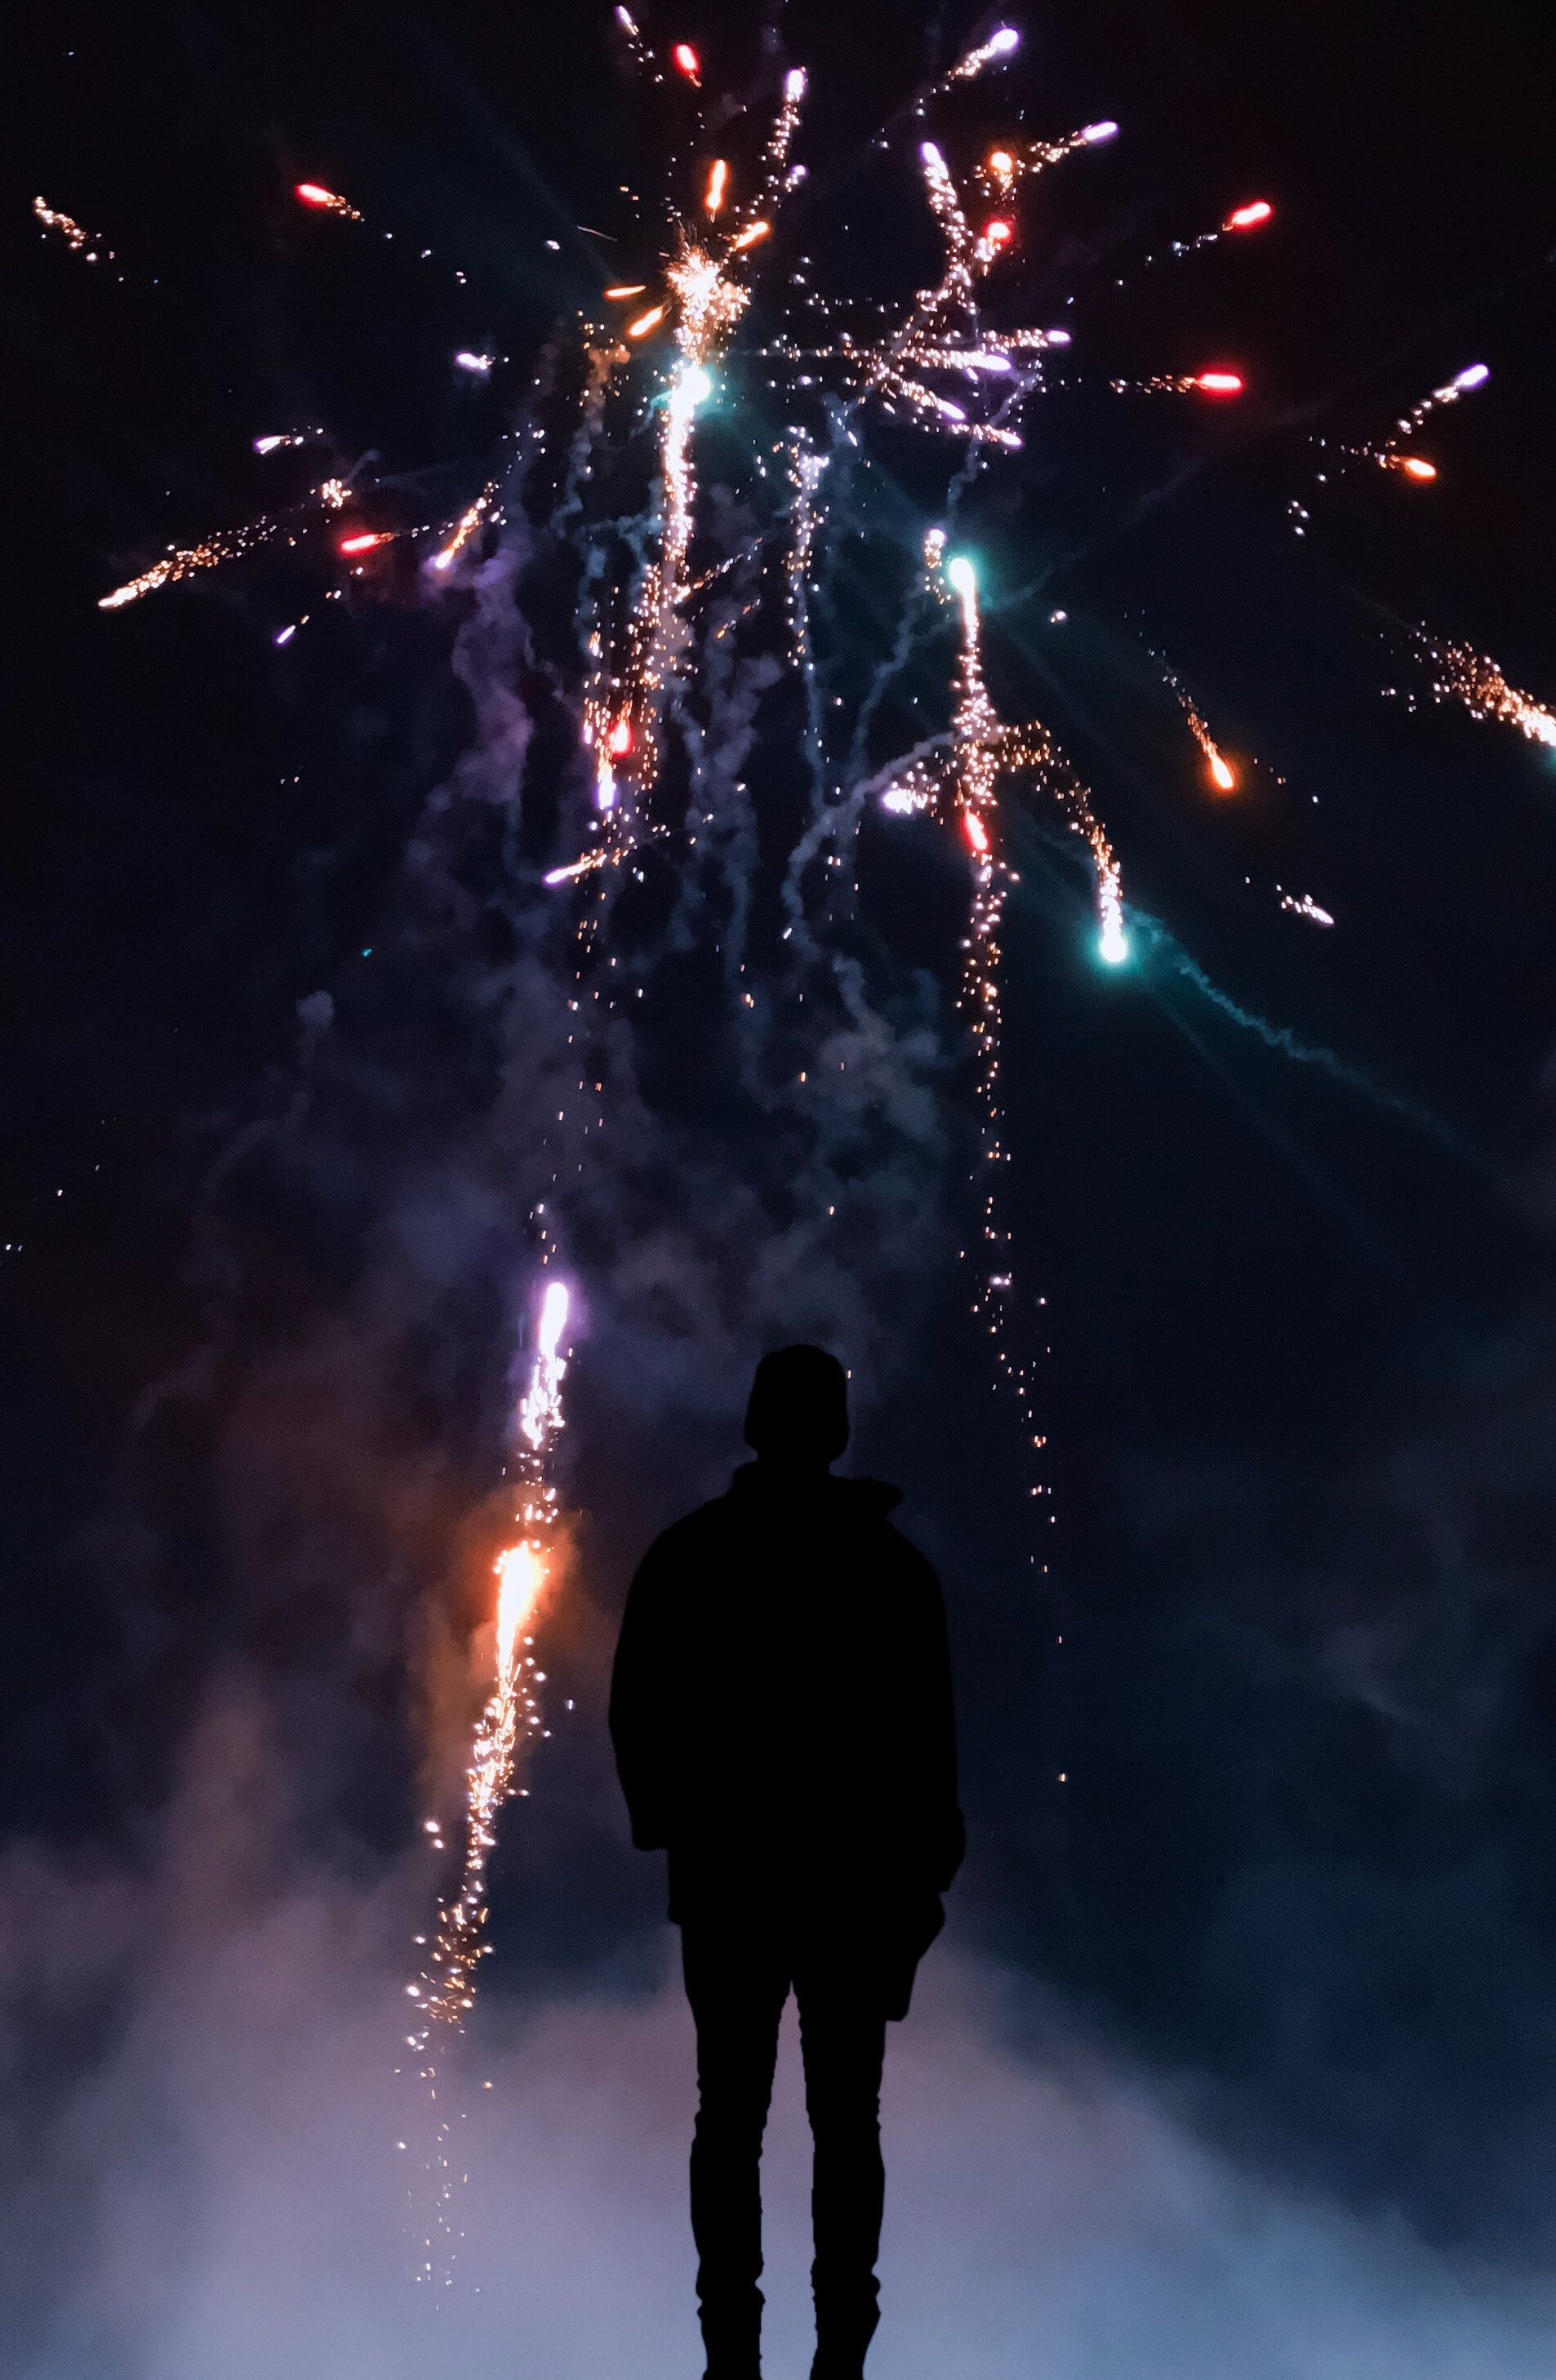 Silhouette of a person in front of fireworks